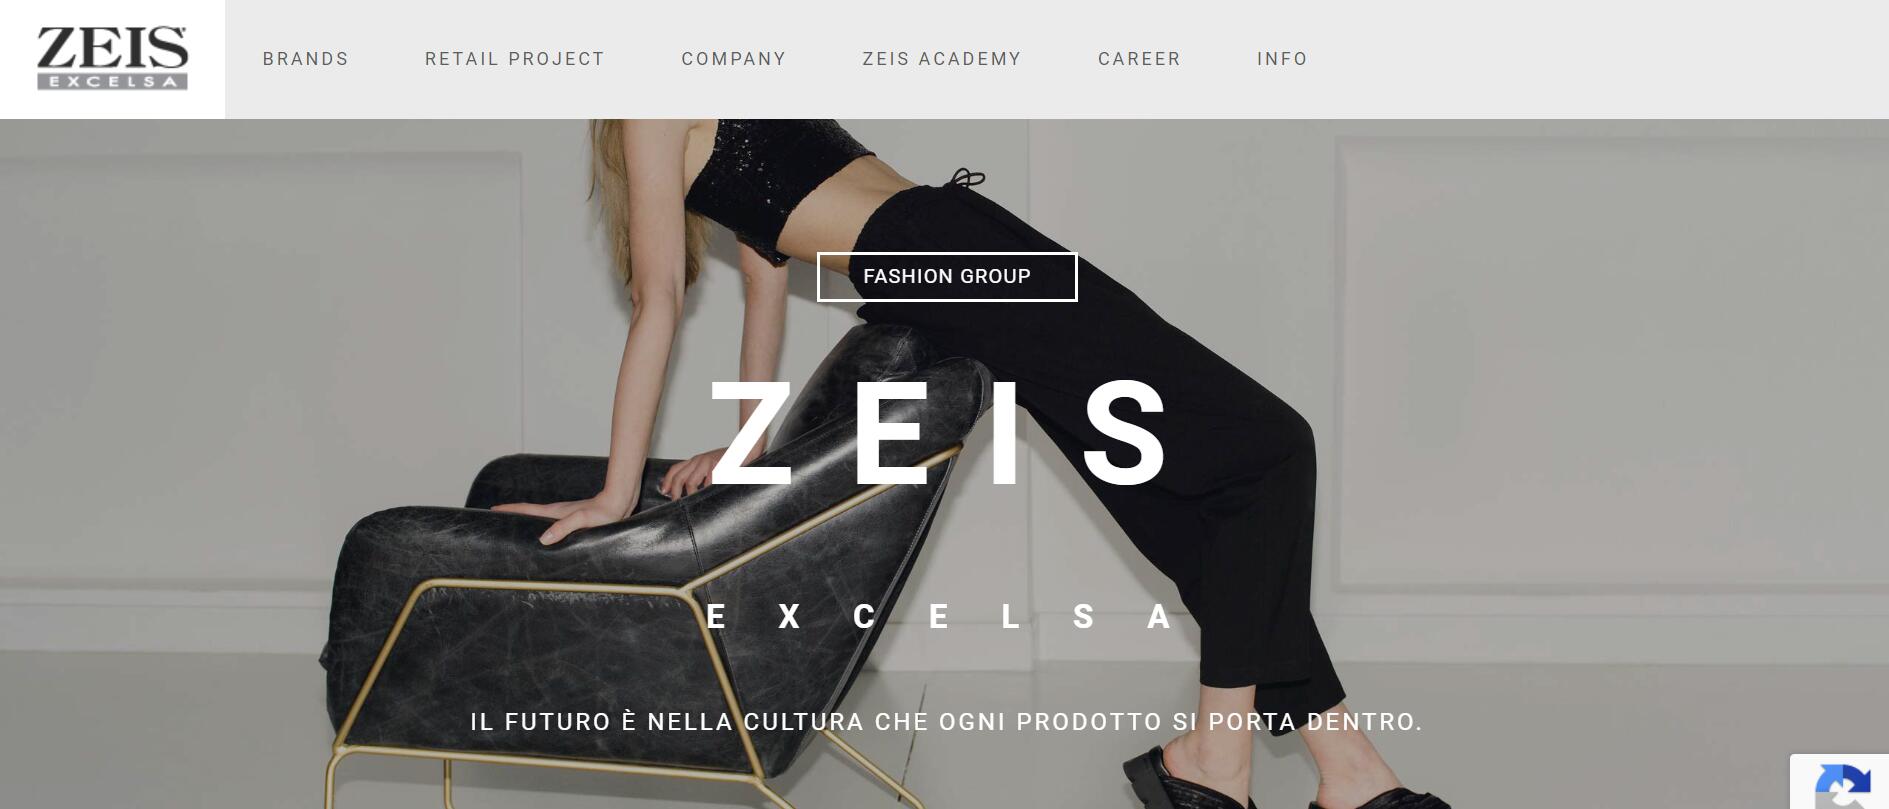 Zeis Excelsa Grew 60% to €20 Billion in 2022 and Pushes Cult in the New Lifestyle Course